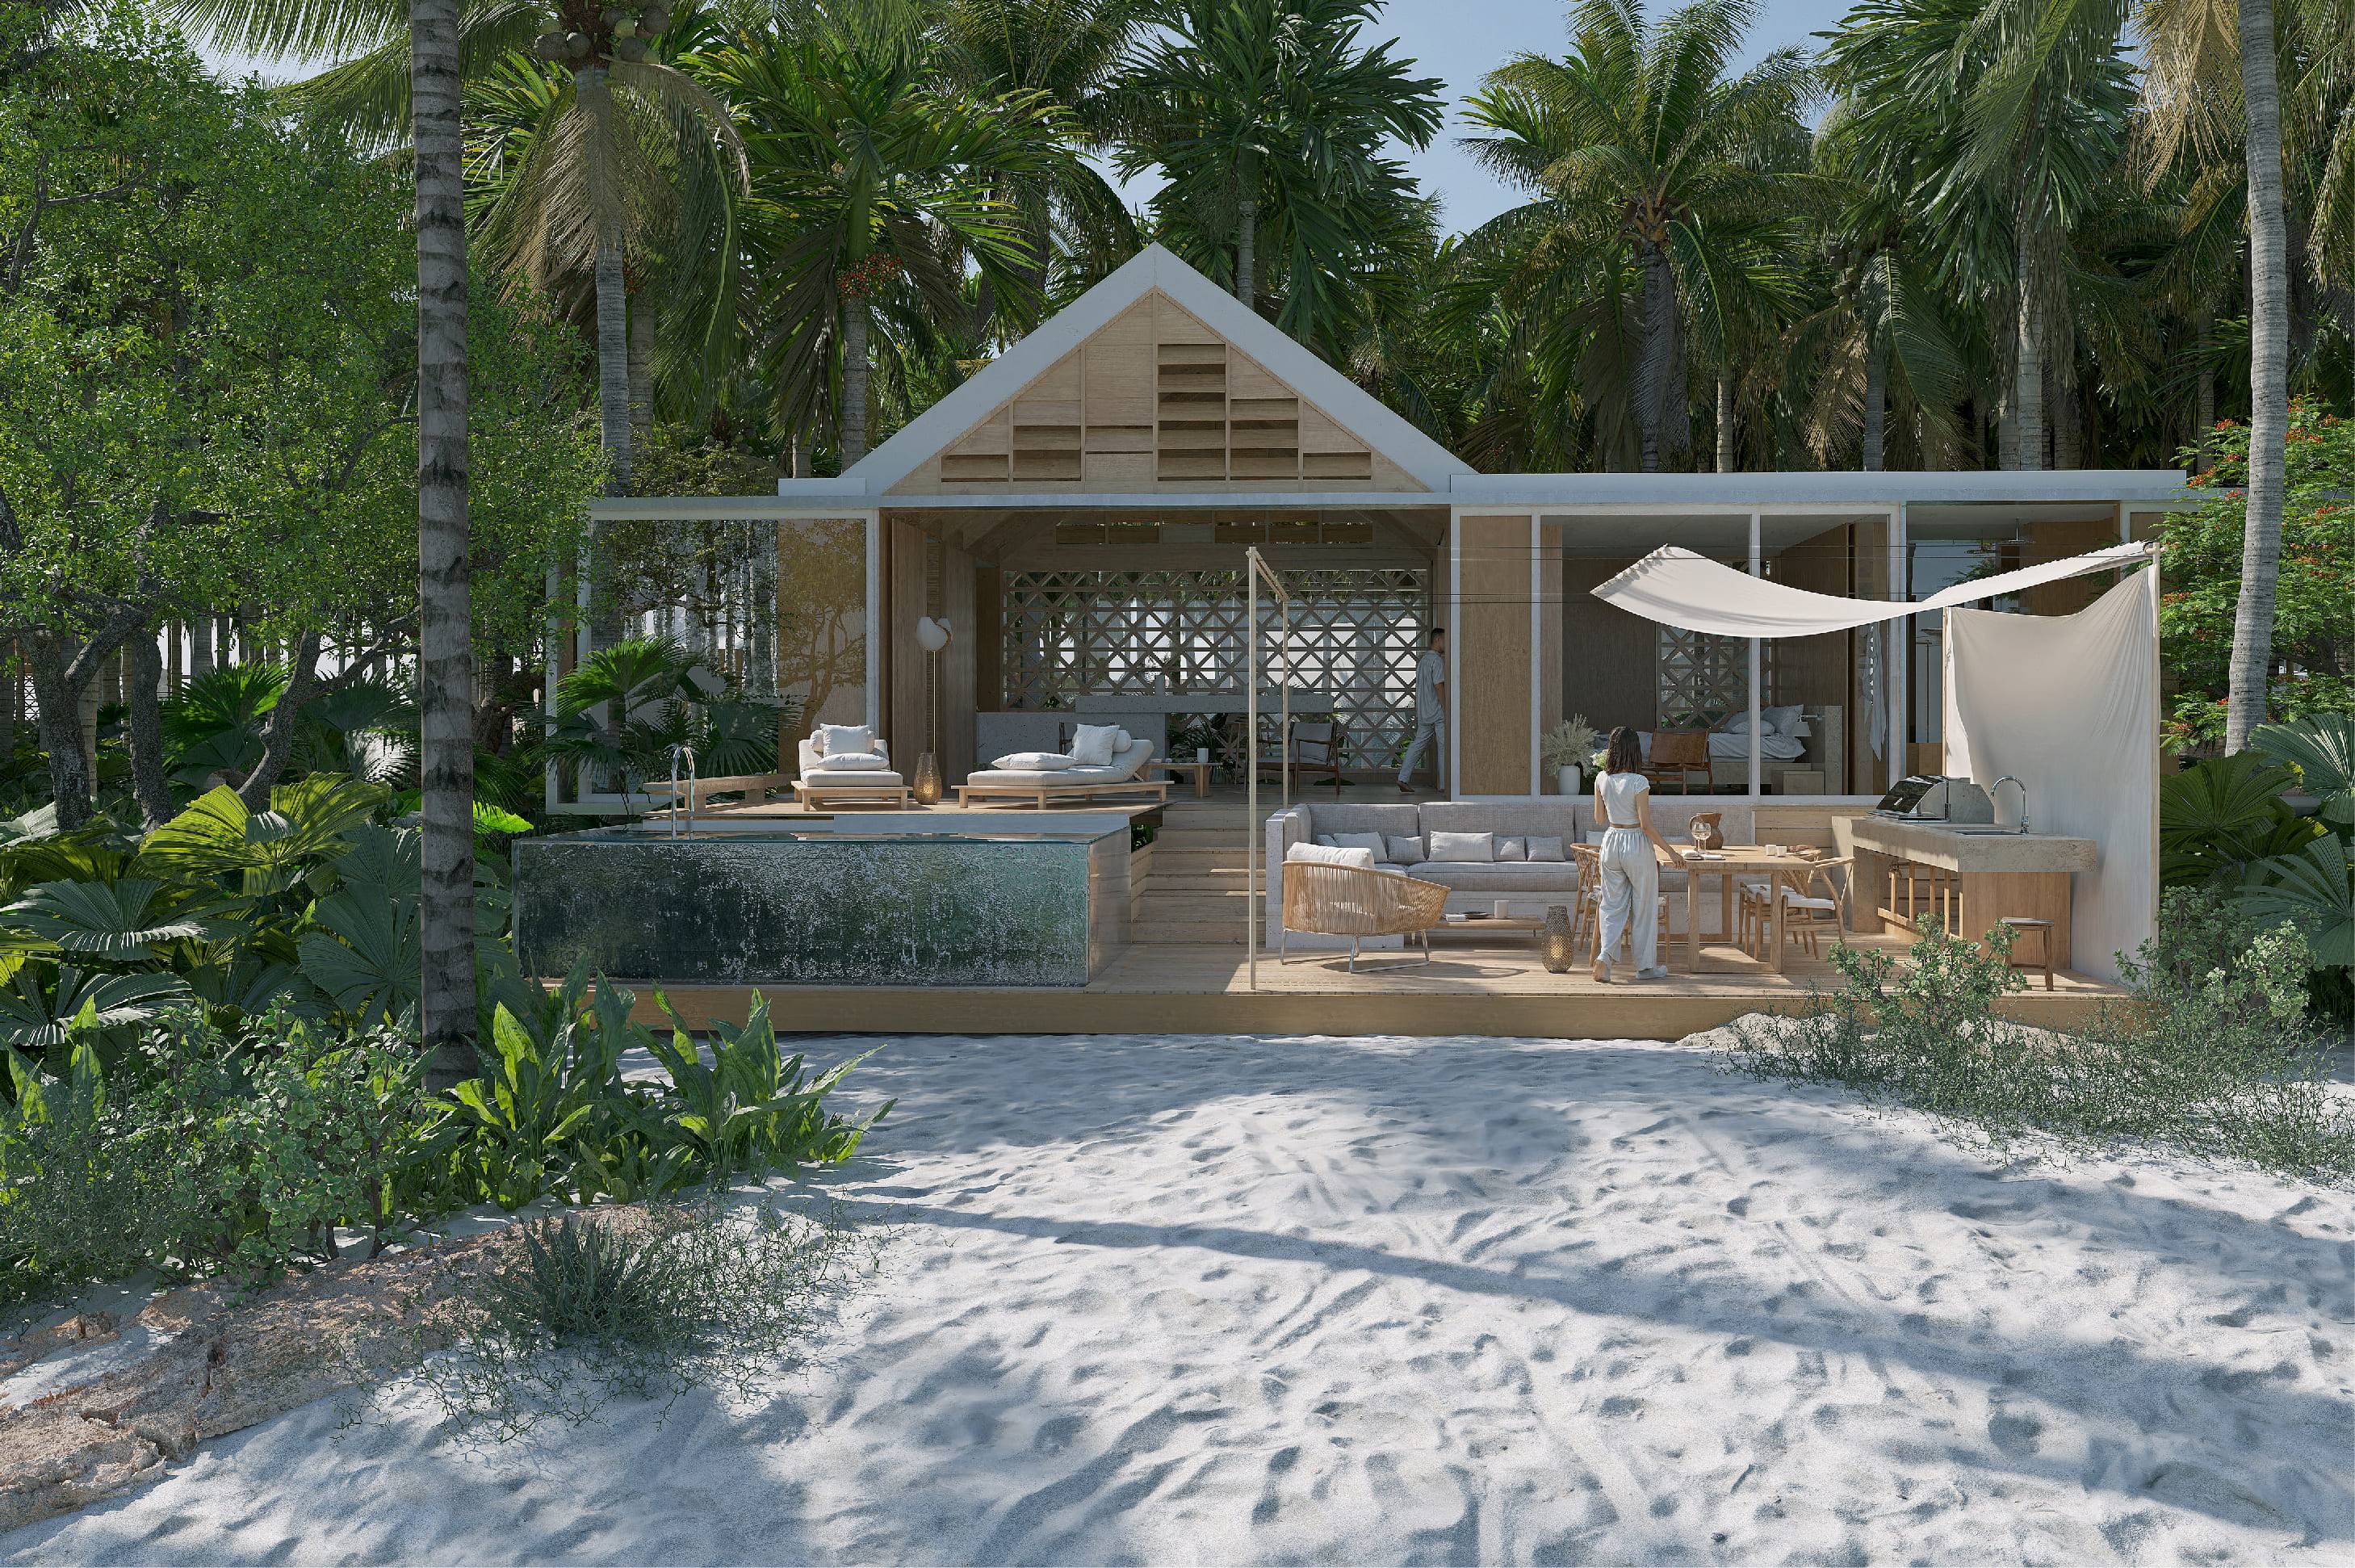 DELUXE TWO BEDROOM VILLA at the first dedicated 5-Star Residence Resort in the Maldives